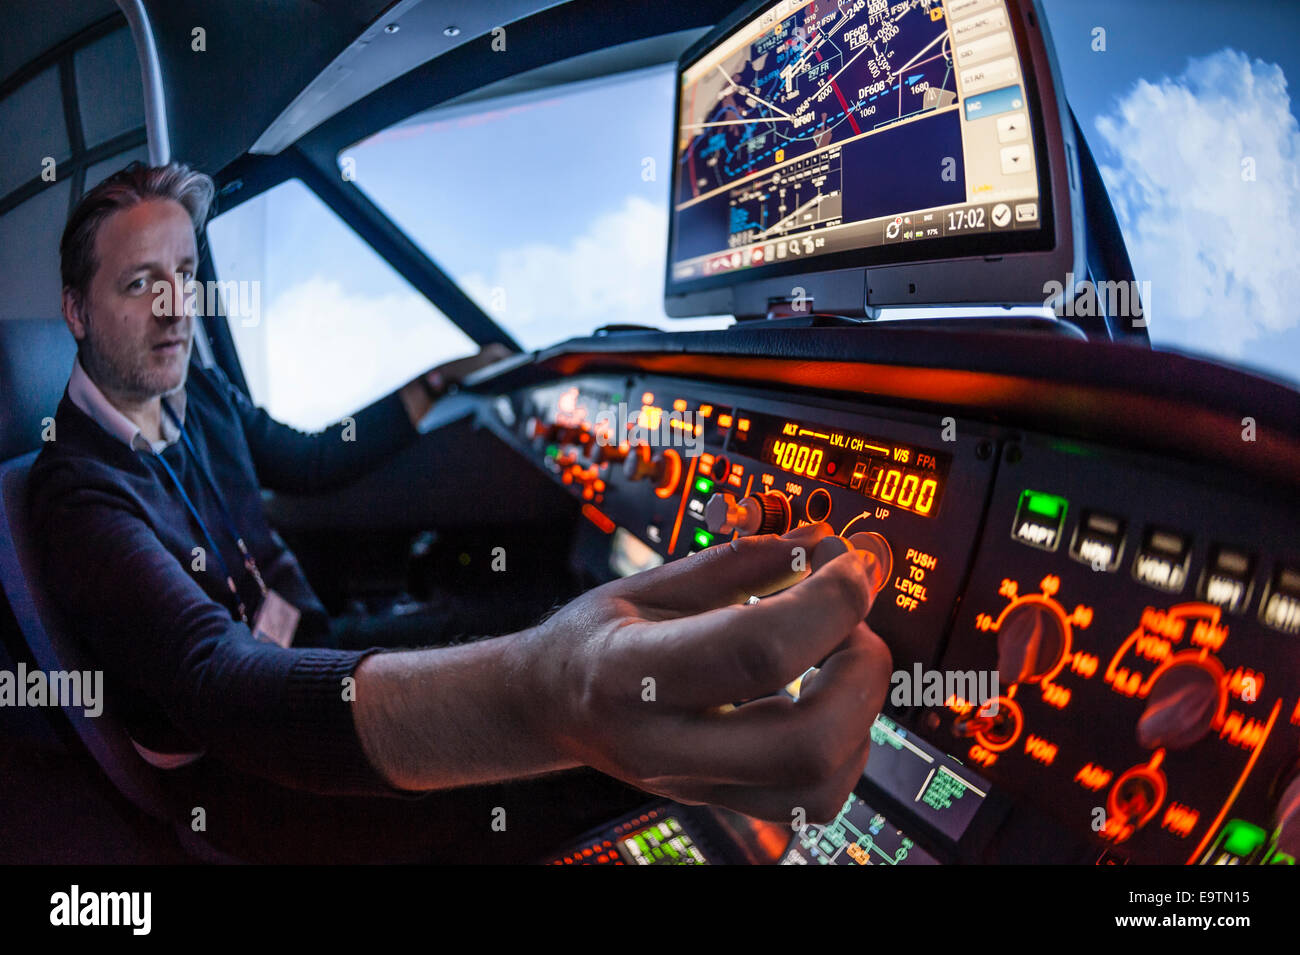 Cockpit of an Airbus A320 flight simulator that is used for training of professional airline pilots (pilot adjusting autopilot) Stock Photo